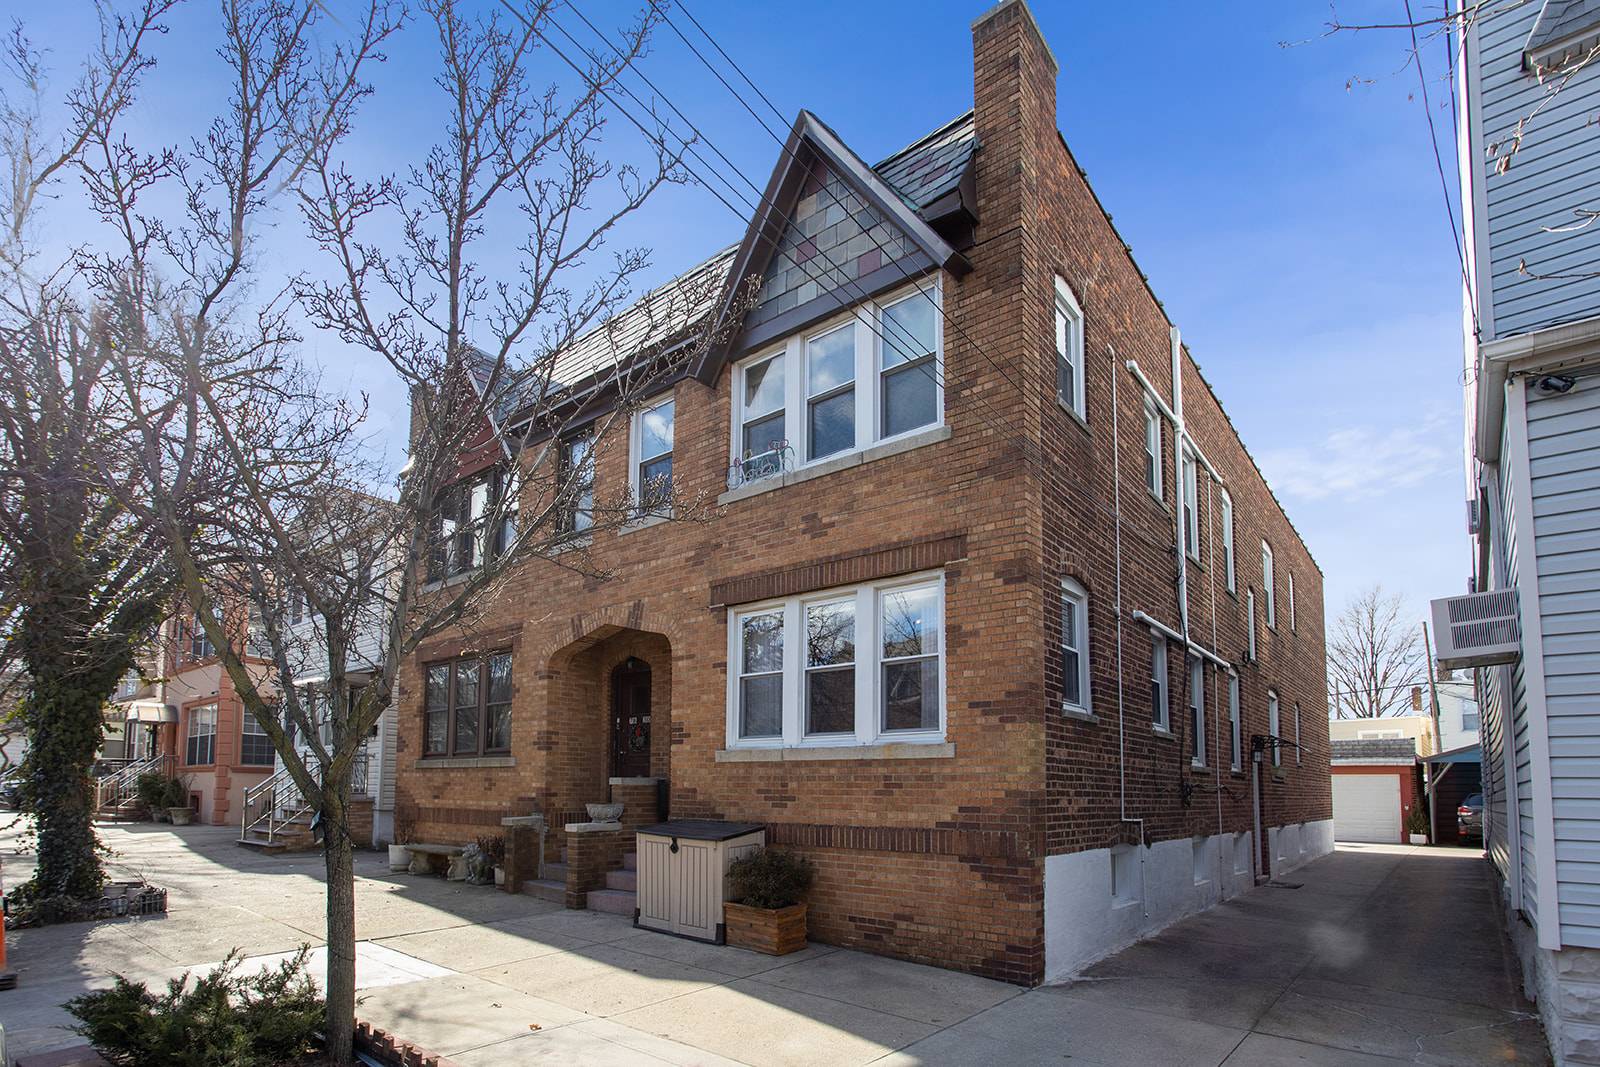 Exquisite semi detached 2 family brick Tudor with oversized two car garage in Upper Glendale.